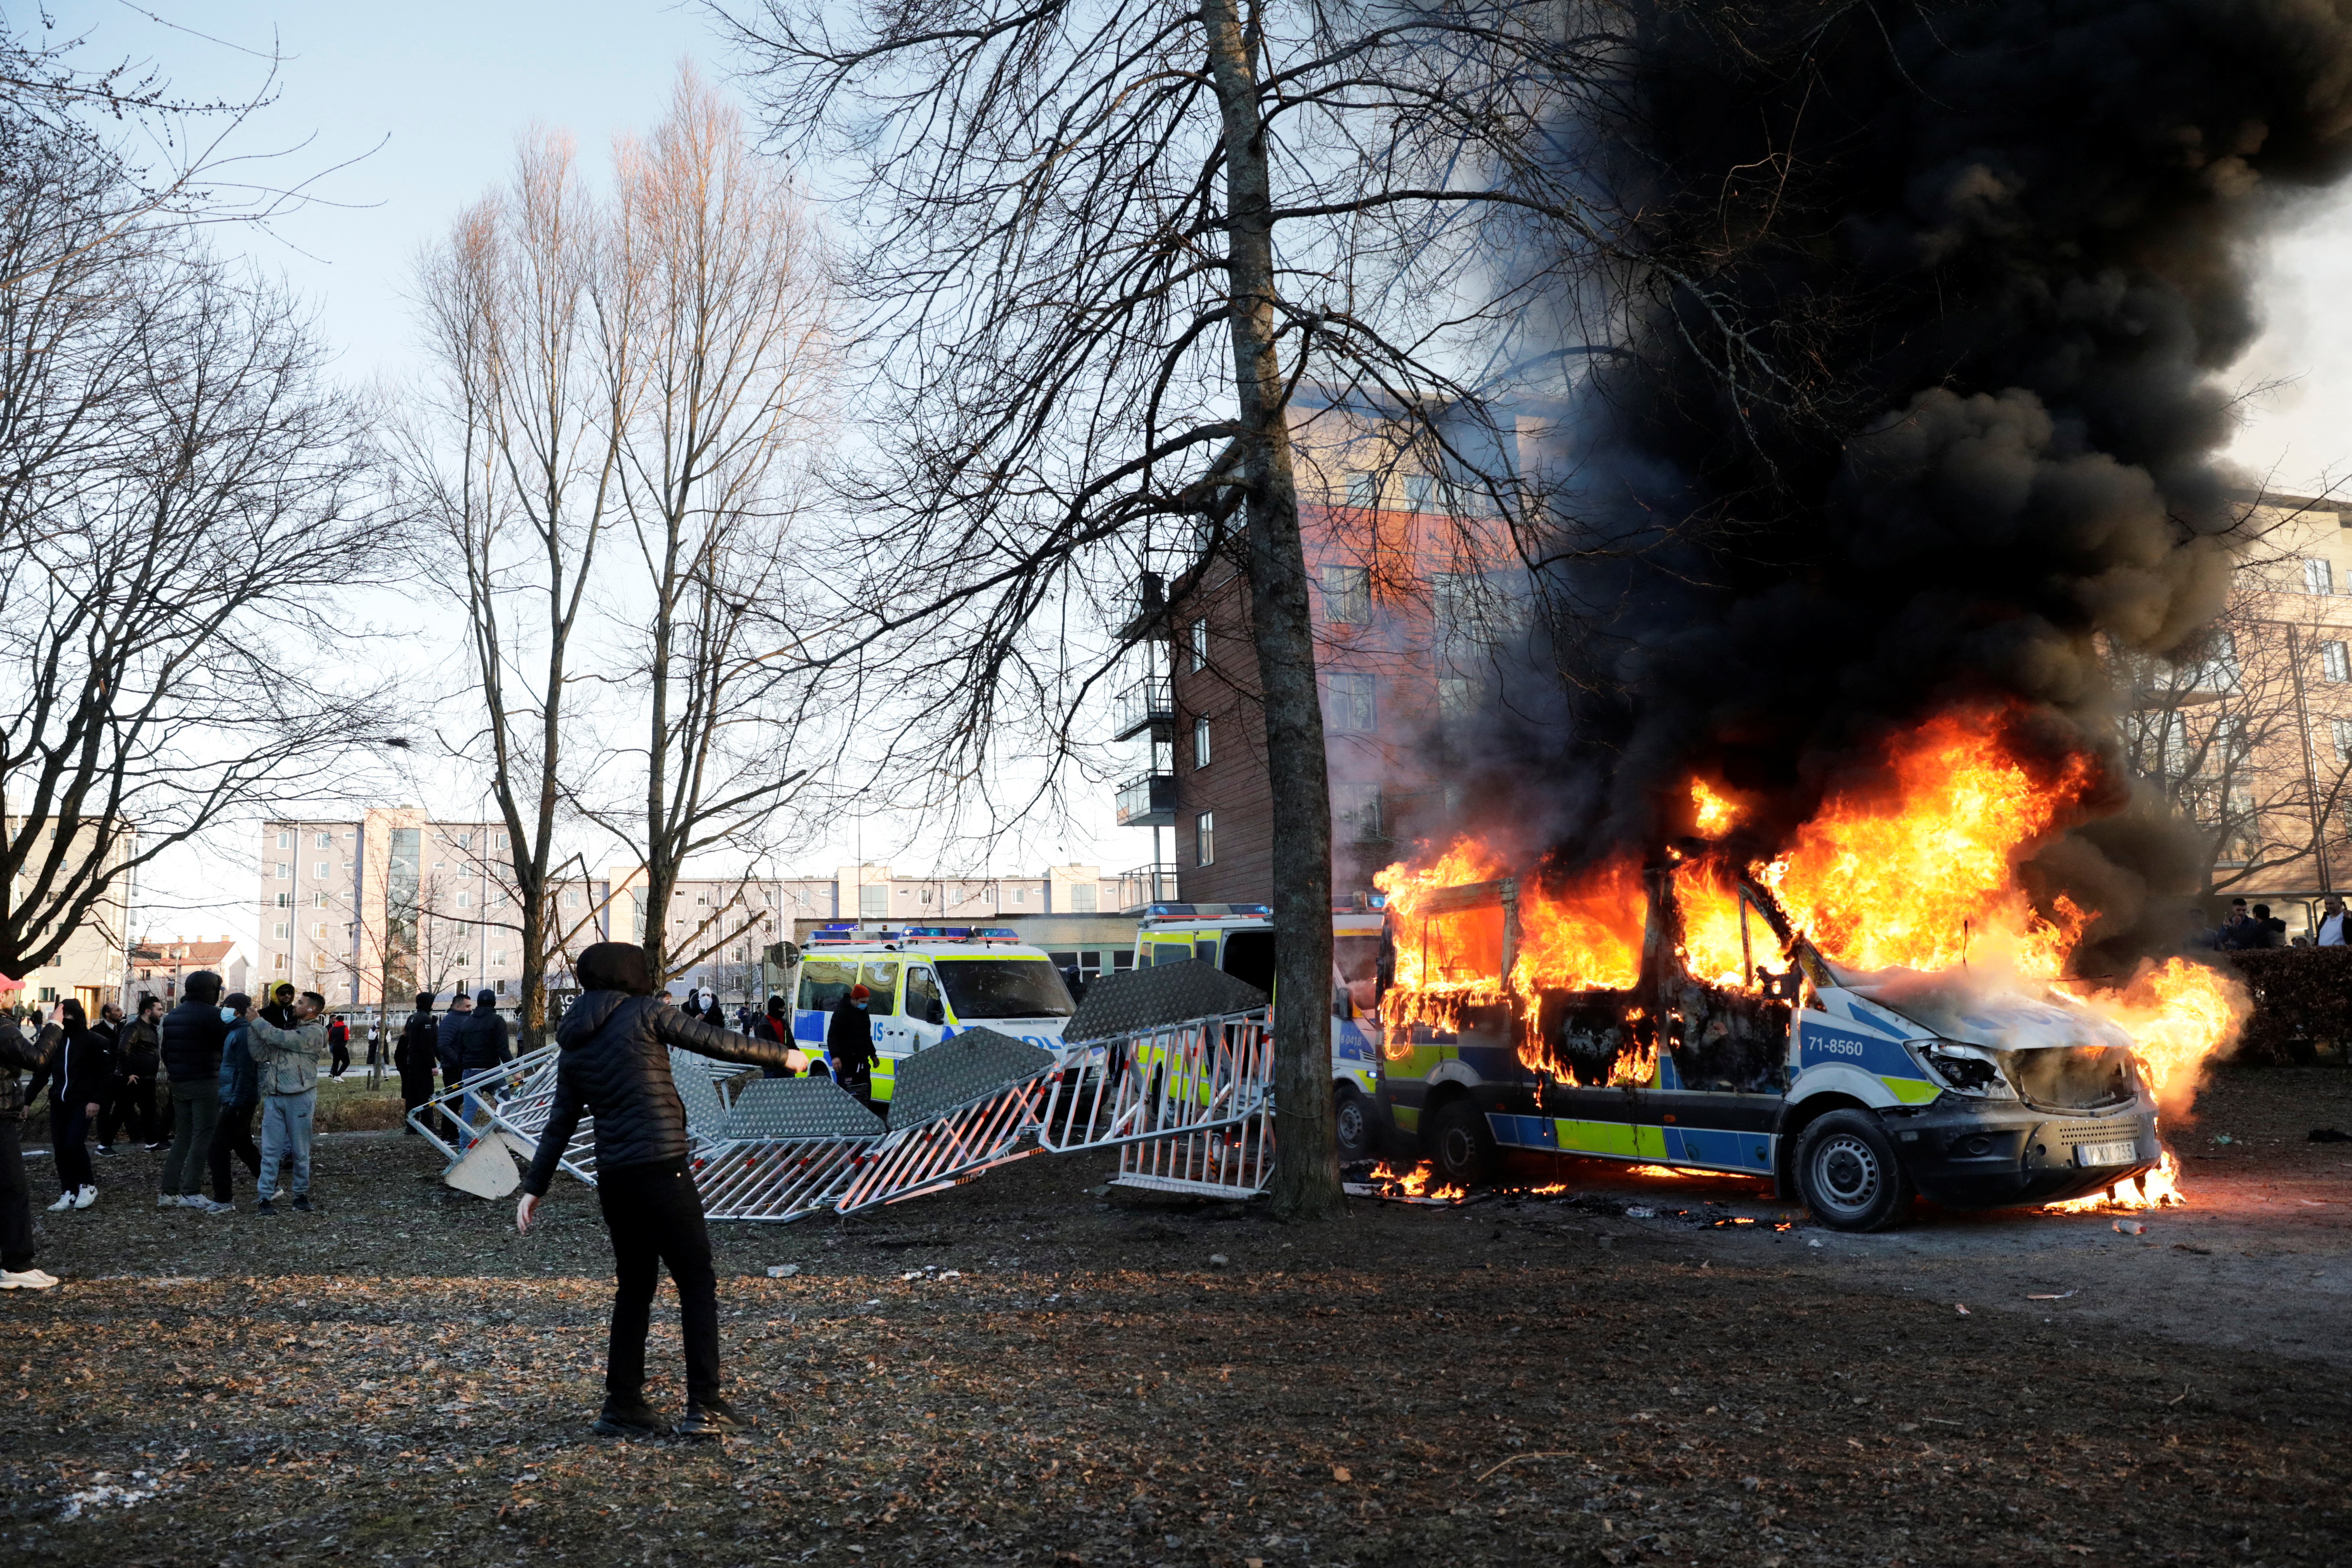 Counter-protesters set fire to a police bus ahead of a demonstration planned by Danish anti-Muslim politician Rasmus Paludan